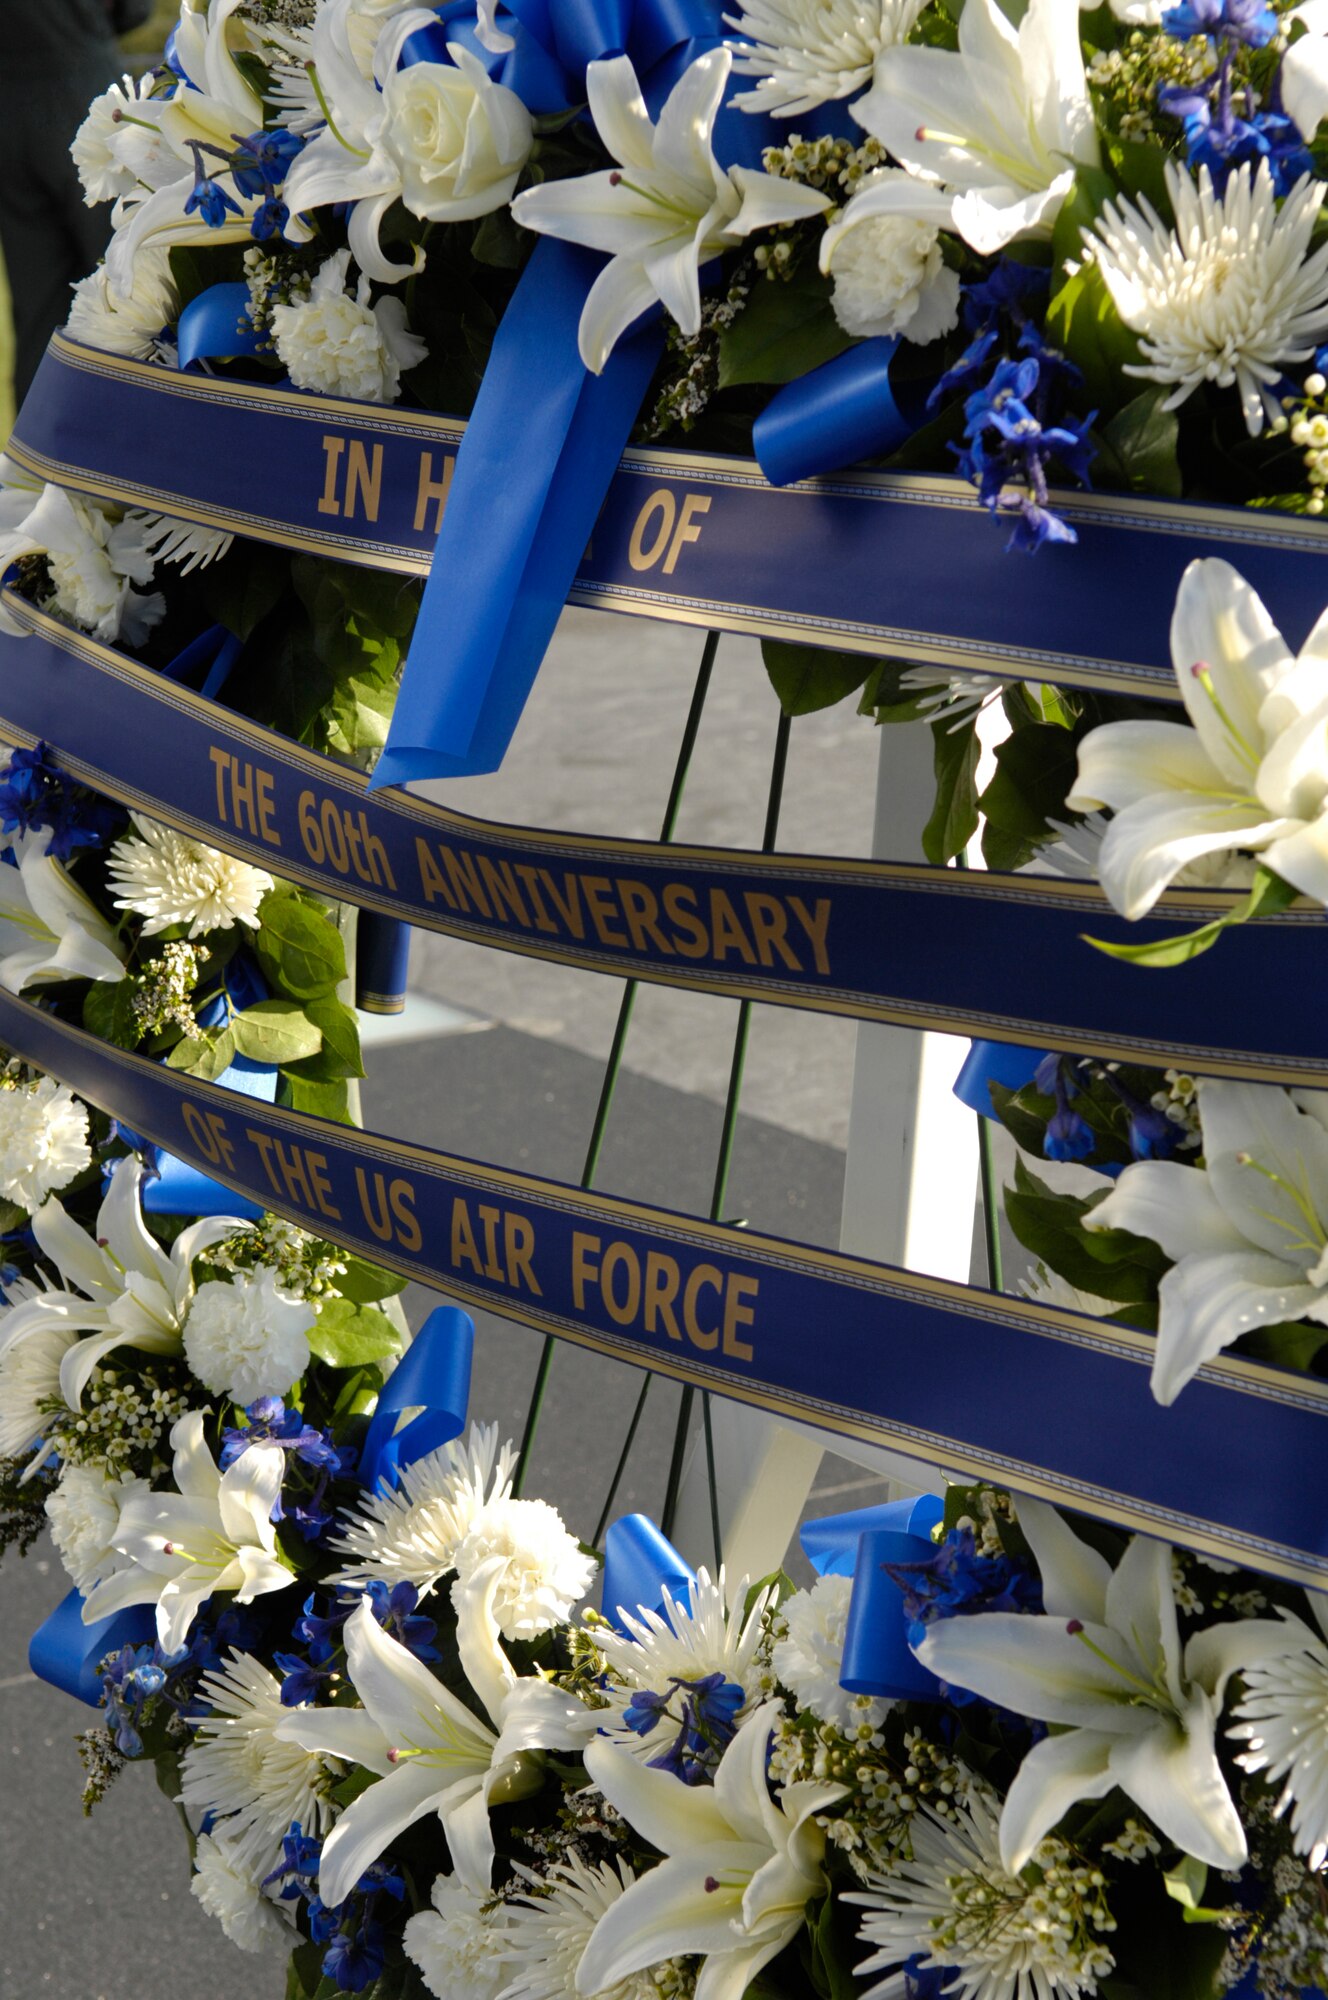 The United States Air Force holds a Wreath Laying Ceremony in honor of celebrating it’s 60th Anniversary Sept. 18, at the Air Force Memorial, Washington. The hosts of today’s event was Secretary of the Air Force Michael W. Wynne, Air Force Chief of Staff Gen. T. Michael Moseley, and Chief Master Sgt. of the Air Force (CMSAF) Rodney J. McKinley. Throughout the year, many bases have held their own ceremonies to celebrate its birthday.  Member’s from all over the National Capitol Region were here to celebrate this event and be apart of Air Force History. (U.S. Air Force photo by Senior Airman Rusti Caraker)